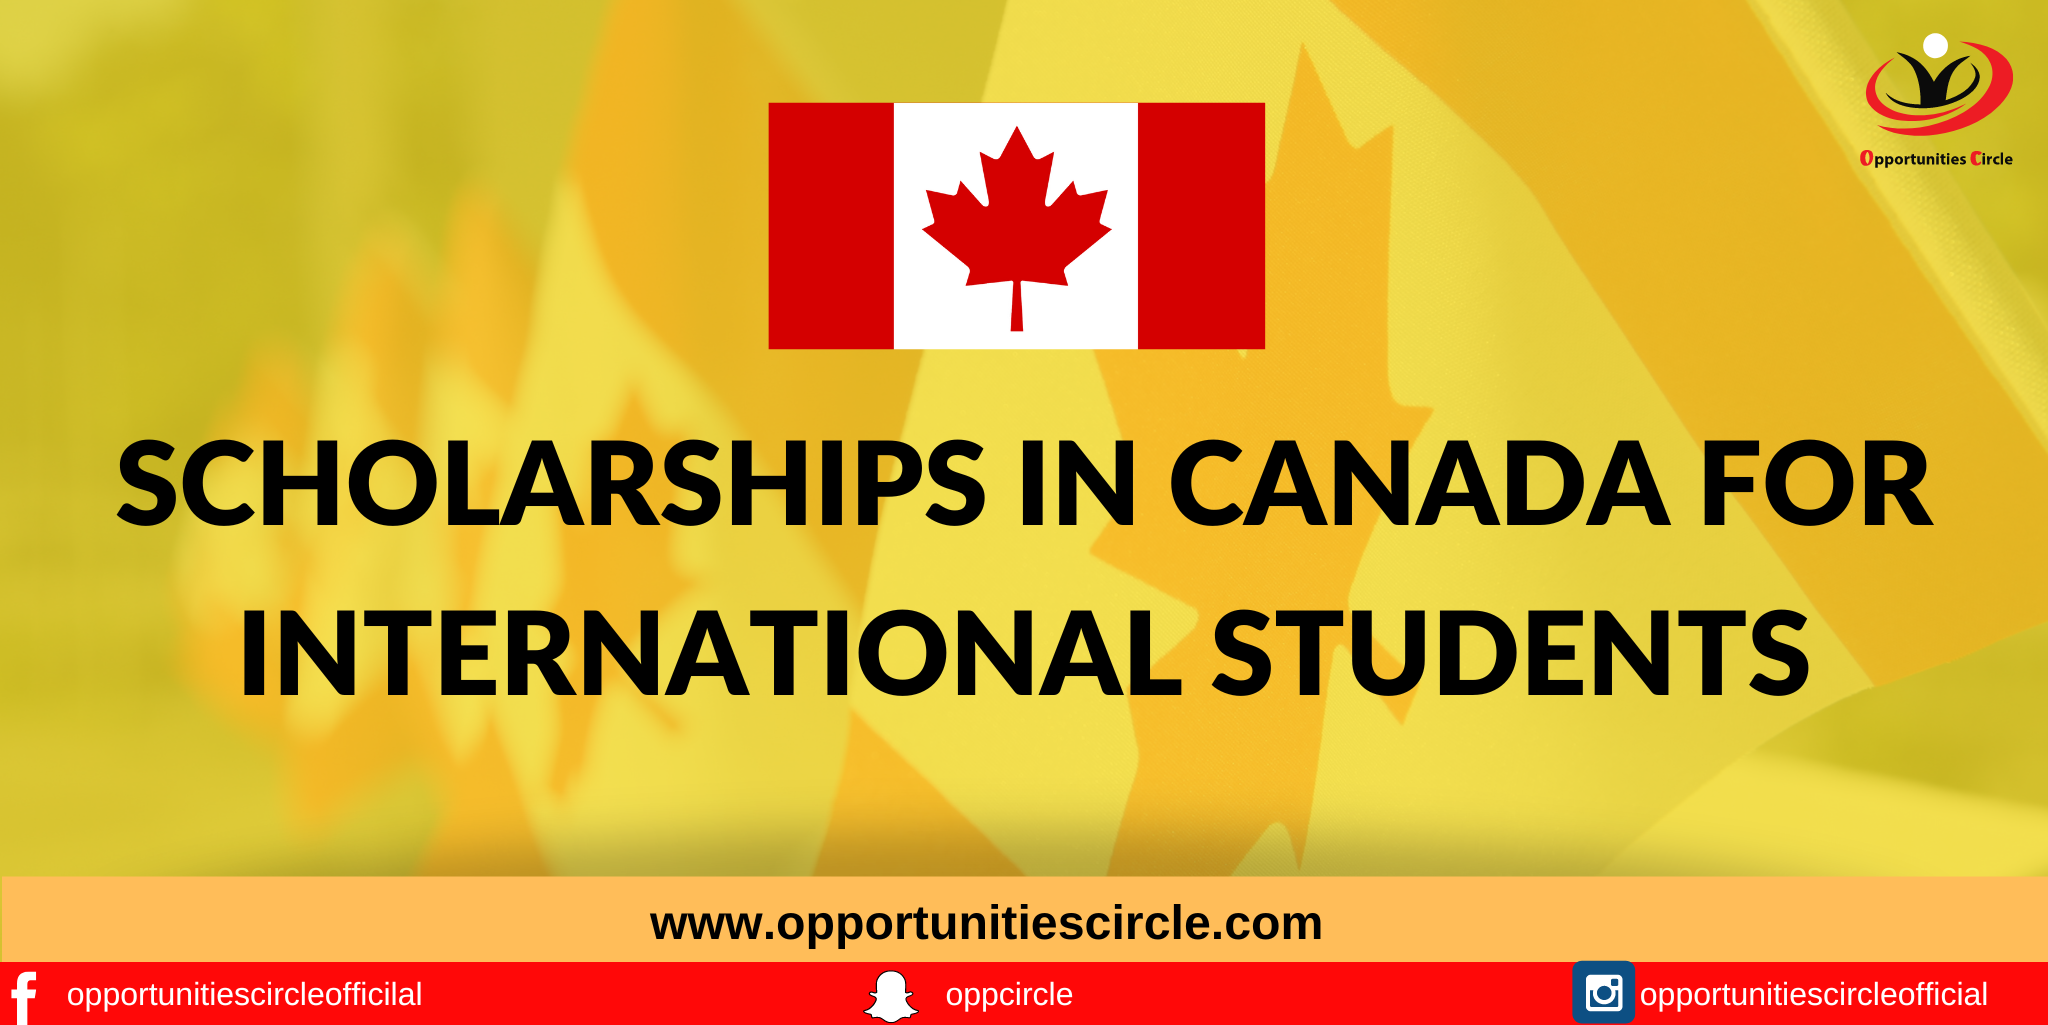 Scholarships in Canada for International Students - Opportunities Circle